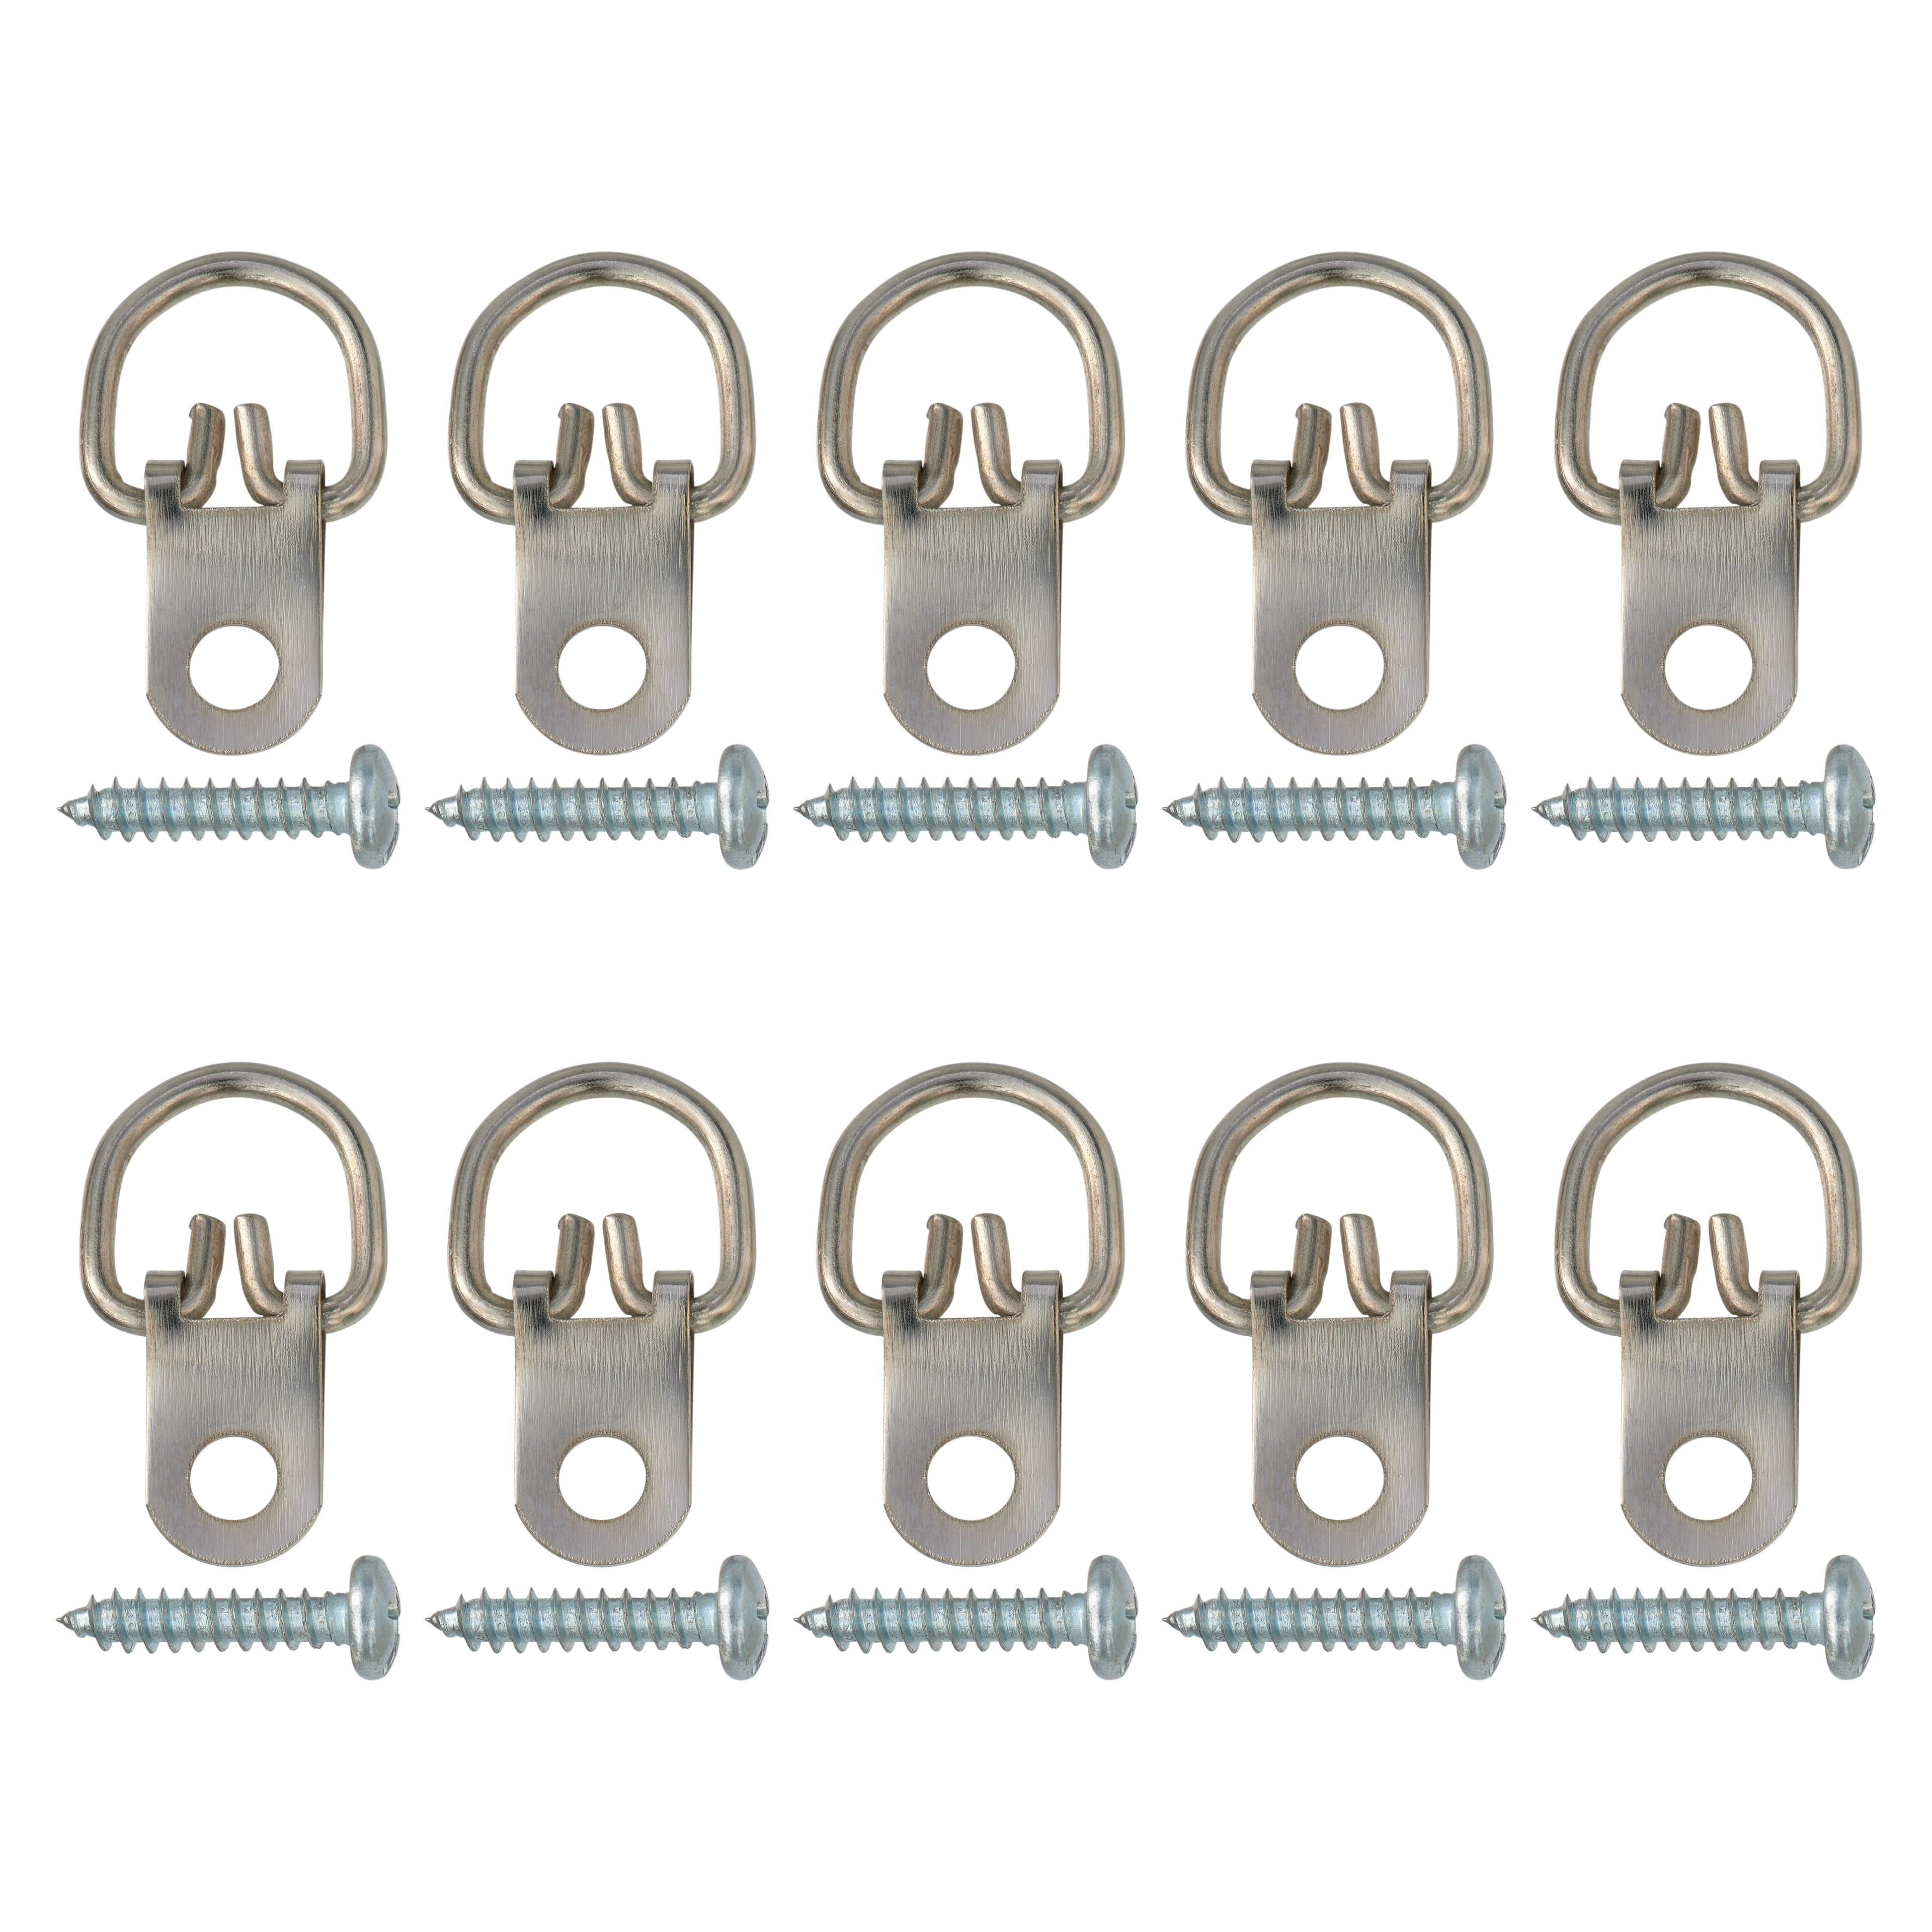 D Ring Hanger Medium 1 Hole 20 pack with screws - The Artist Warehouse